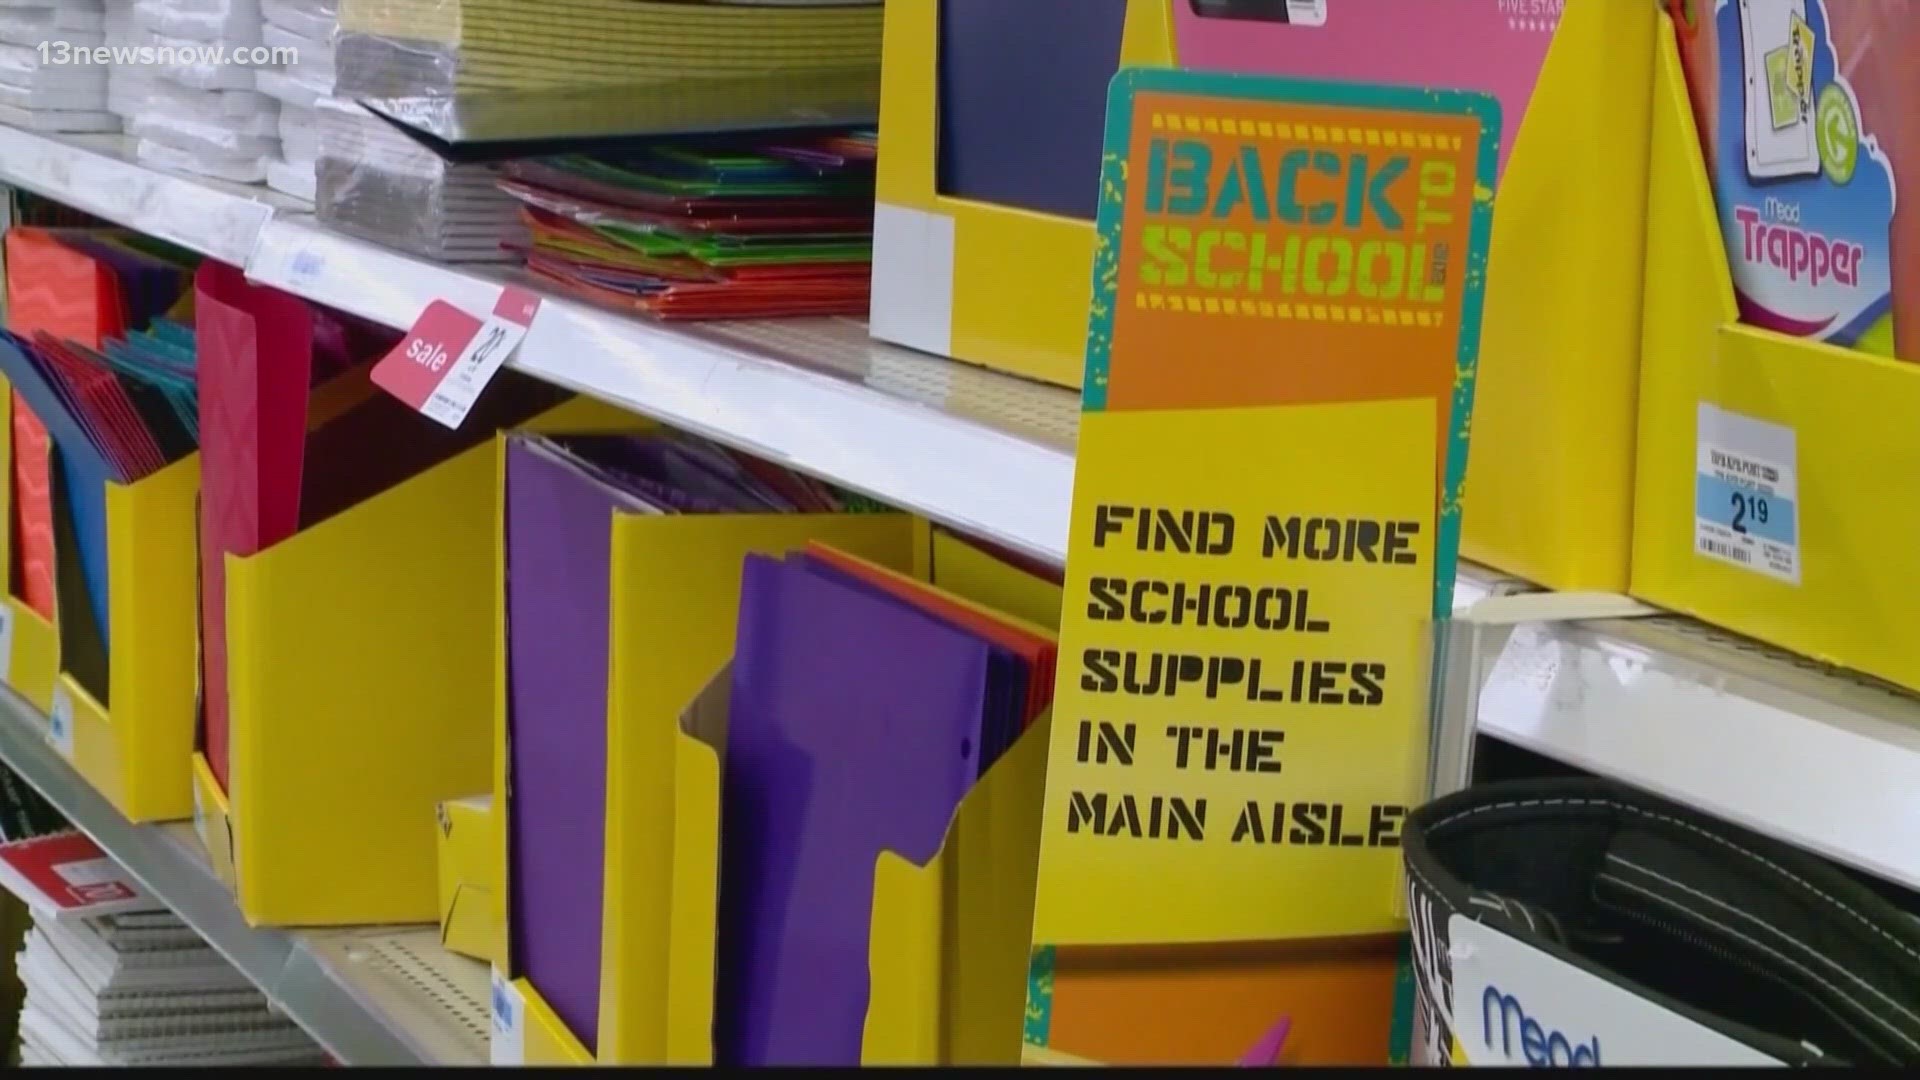 The state provision that allowed for a three-day sales tax holiday expired last month. Many parents and teachers relied on it to stock up on school supplies.